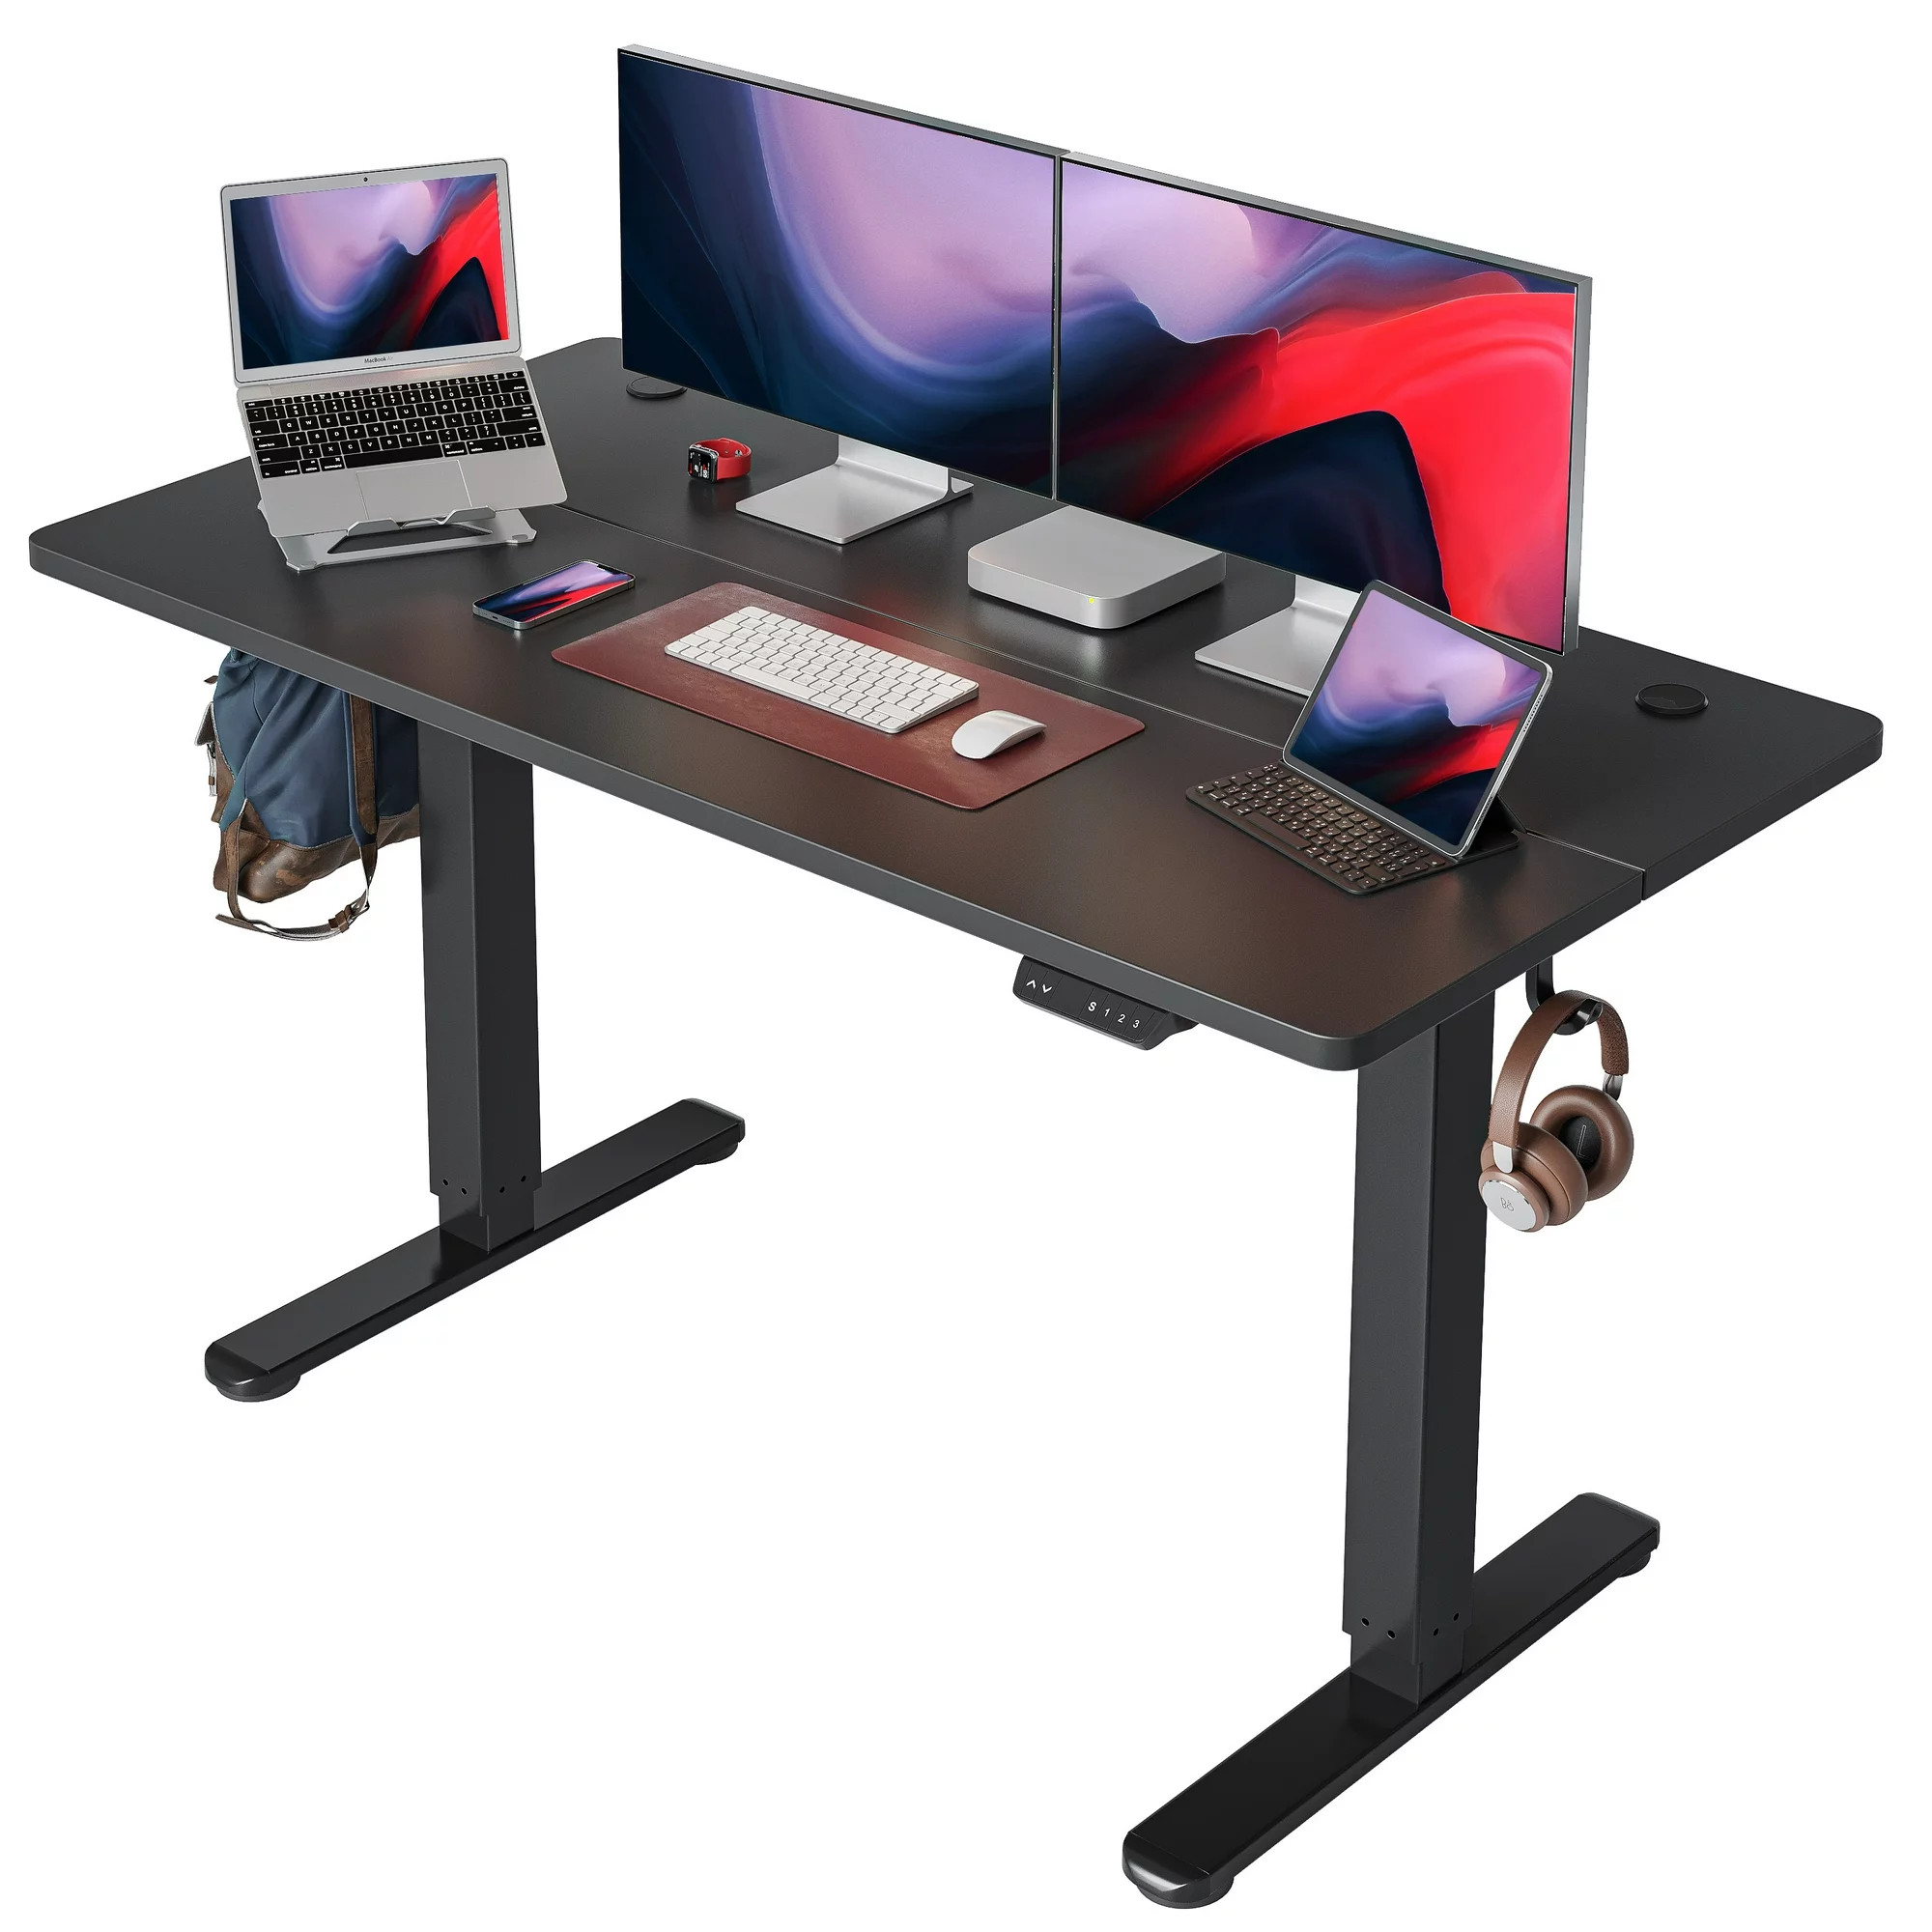 FEZIBO 55" Electric Height Adjustable Standing Desk - Sit Stand Home Office Desk with Splice Board, Black Frame/Black Top